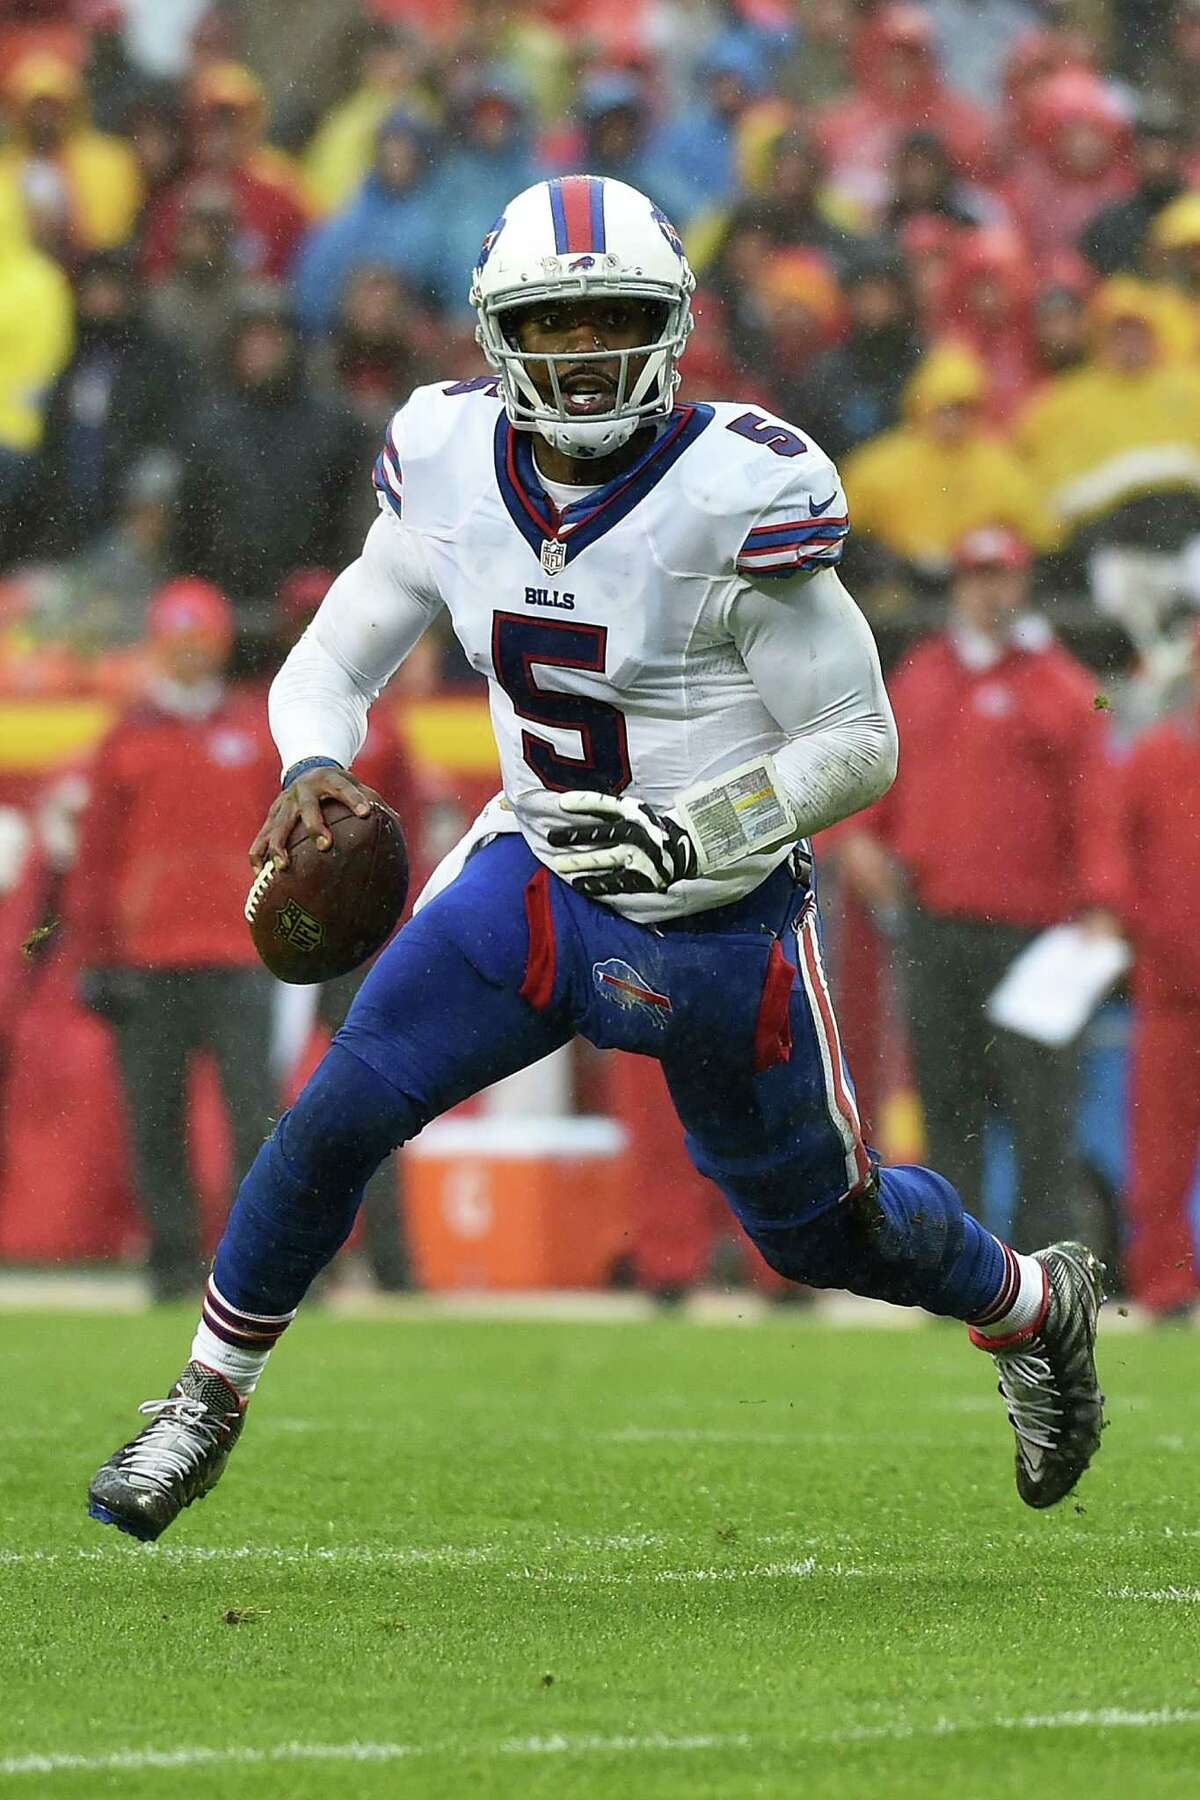 KANSAS CITY, MO - NOVEMBER 29: Tyrod Taylor #5 of the Buffalo Bills rolls out to pass at Arrowhead Stadium during the second quarter of the game against the Kansas City Chiefs on November 29, 2015 in Kansas City, Missouri. (Photo by Peter Aiken/Getty Images)